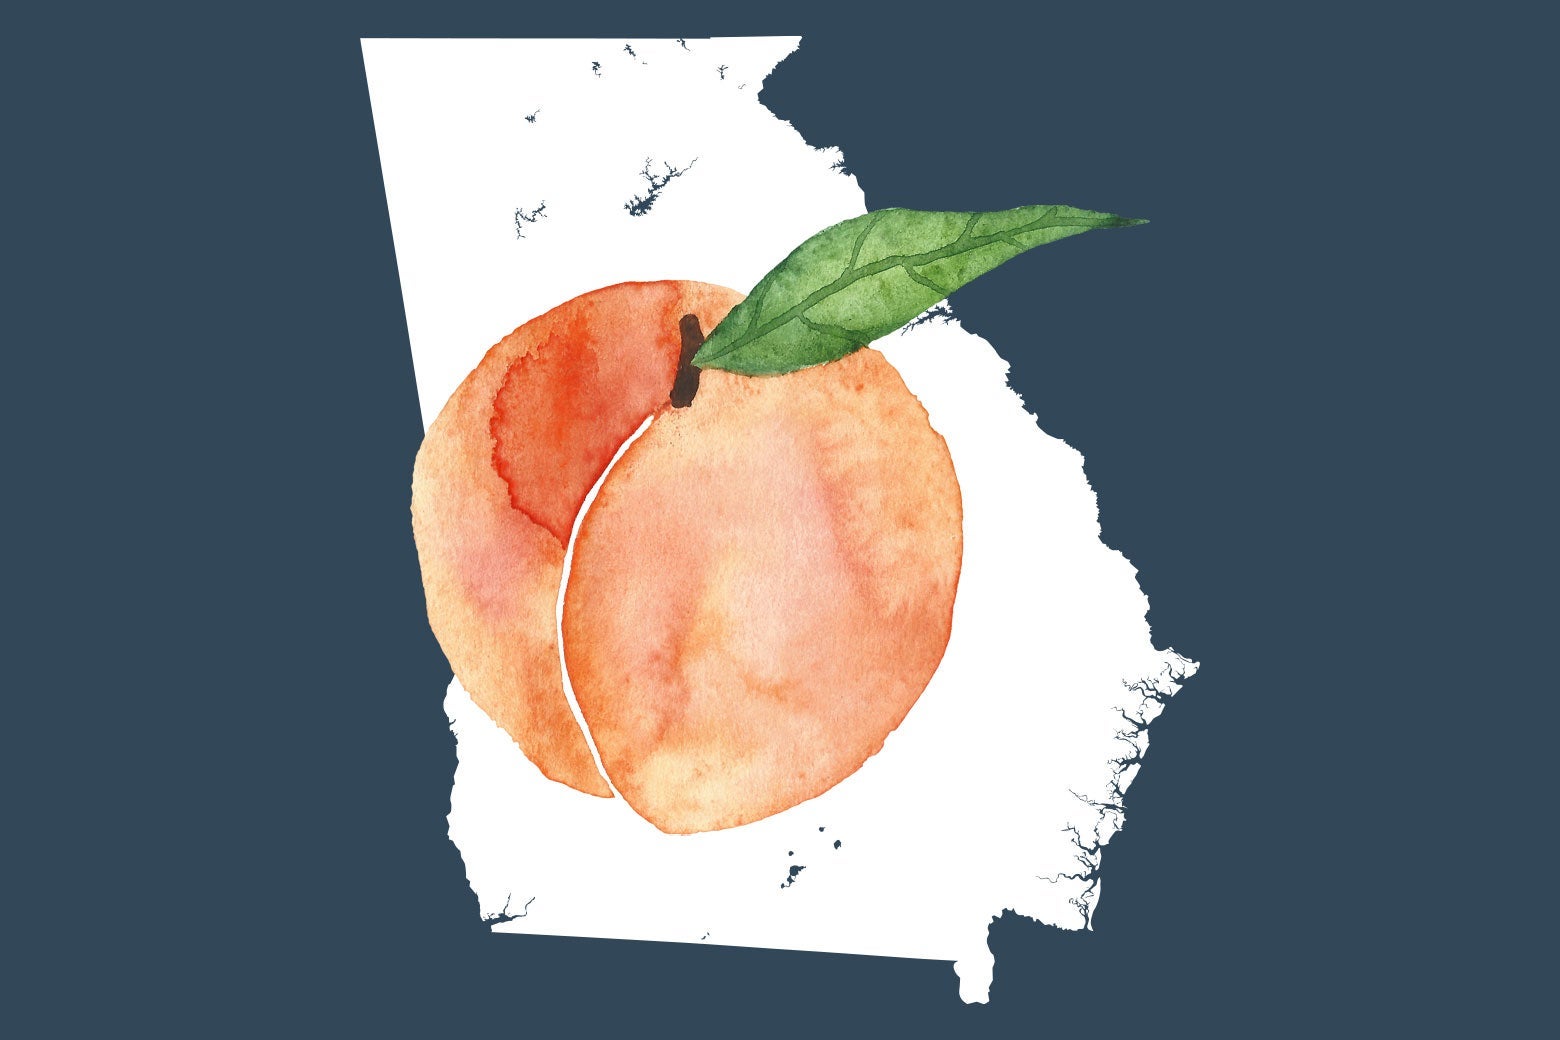 The global history of the peach.